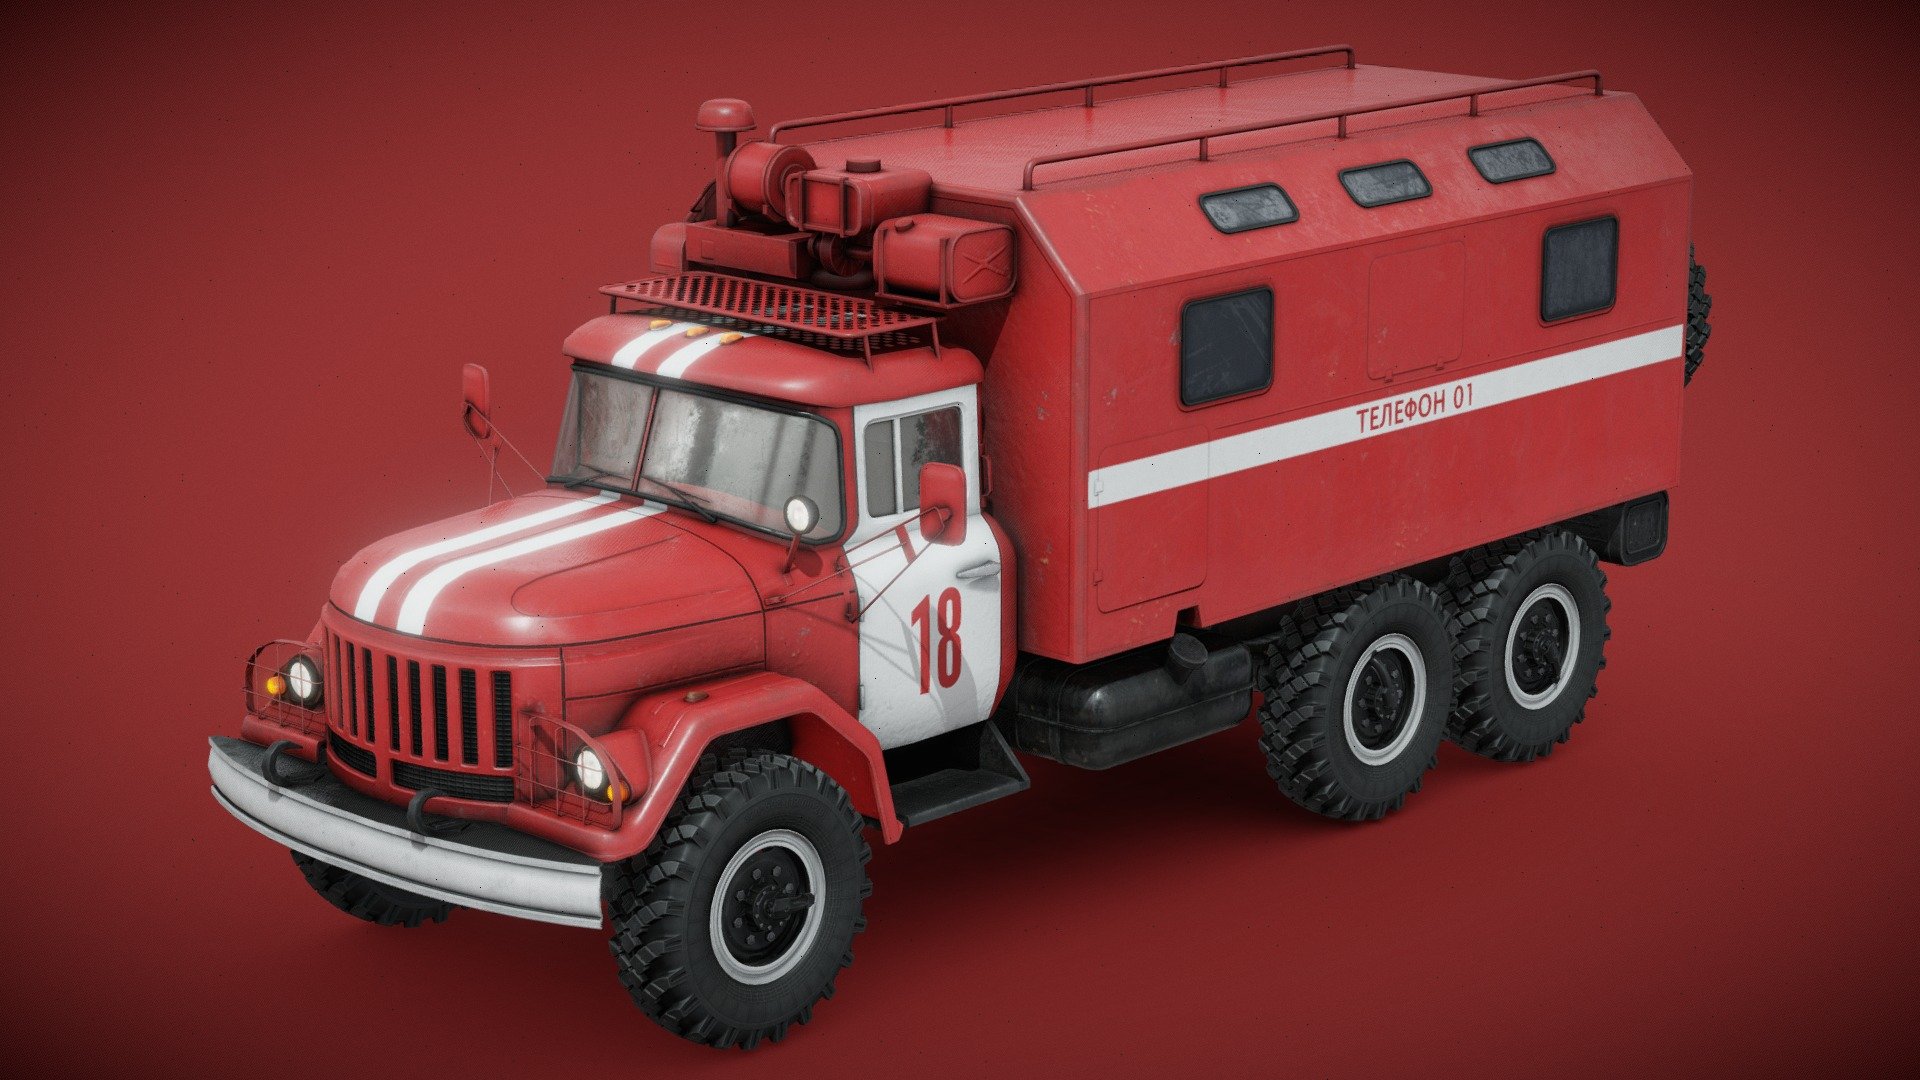 General purpose 3.5 tonne 6x6 truck designed in the Soviet Union. Here, in fire brigade mobbile command post version.

Separate materials for: cabin, interior, glass, frame, wheel and command module.

Wheels are separate objects.

4k PBR textures for cabin, interior and command module. 2k for frame and wheel. 1k for the glass.

Textures for glass and command module with alpha transparency 3d model